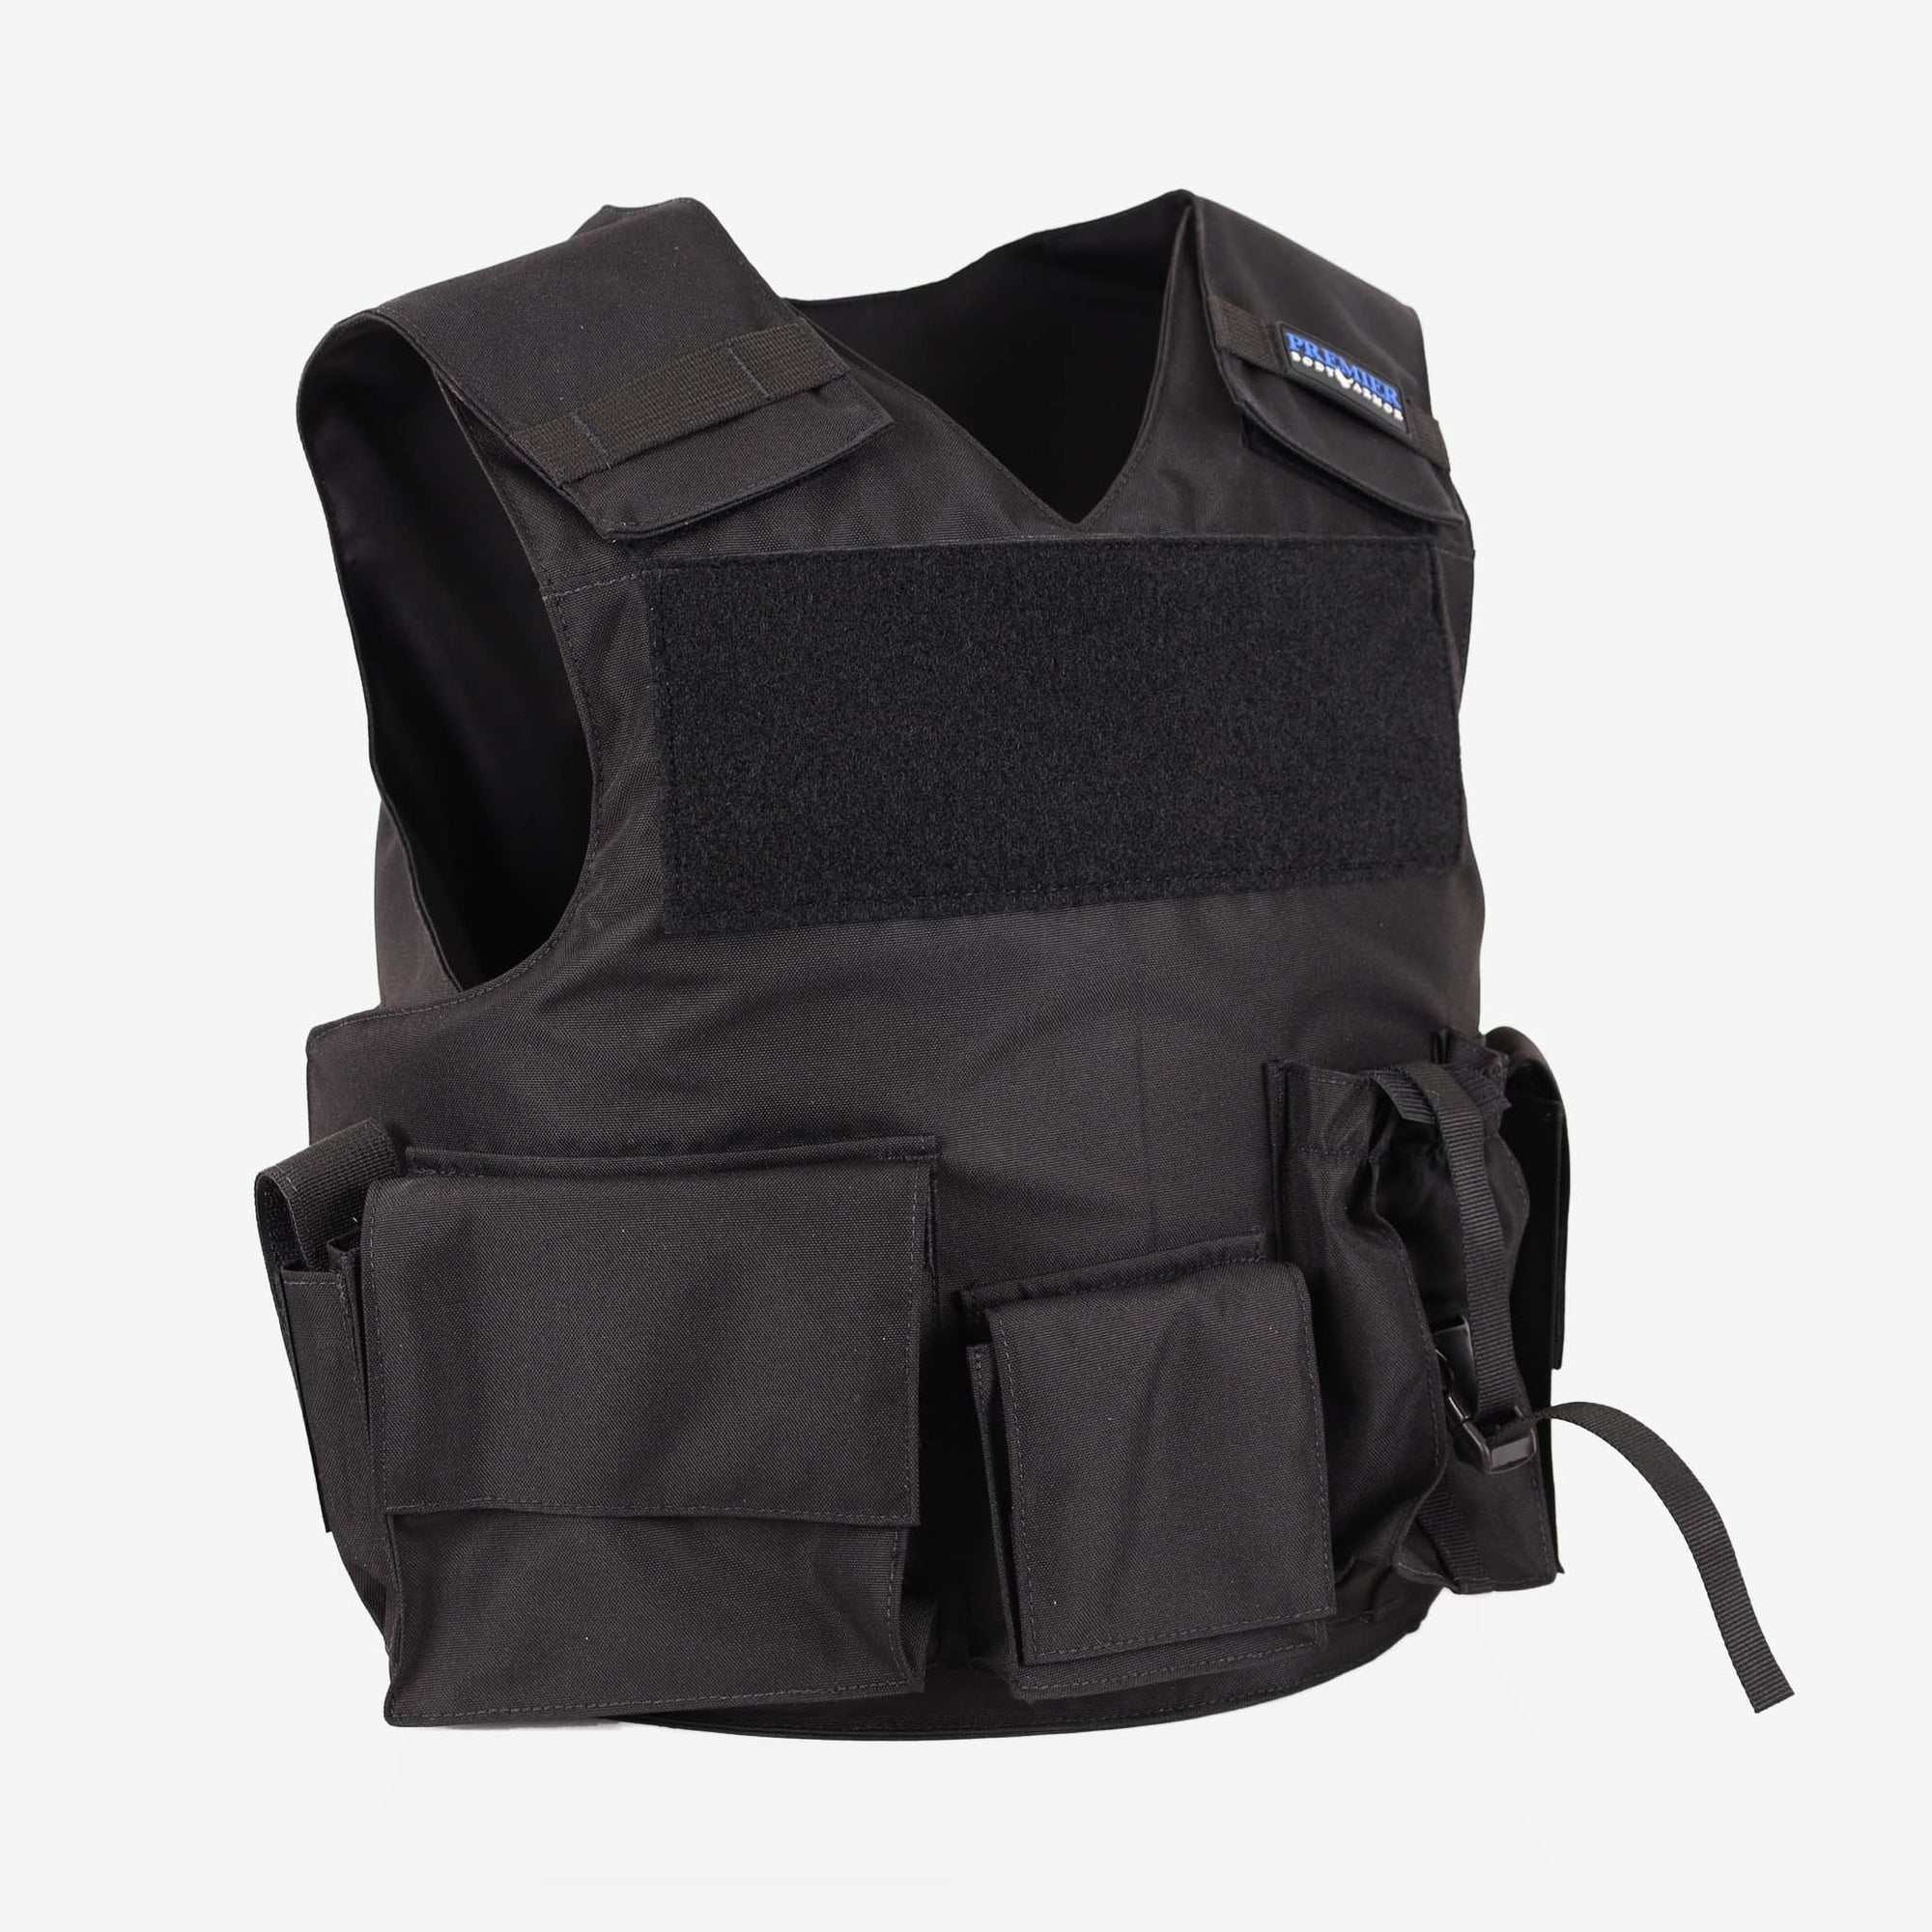 Our First Responder Vest available in black. A bulletproof vest option for any occupation. Level 3a body armor that stops all handgun rounds. 